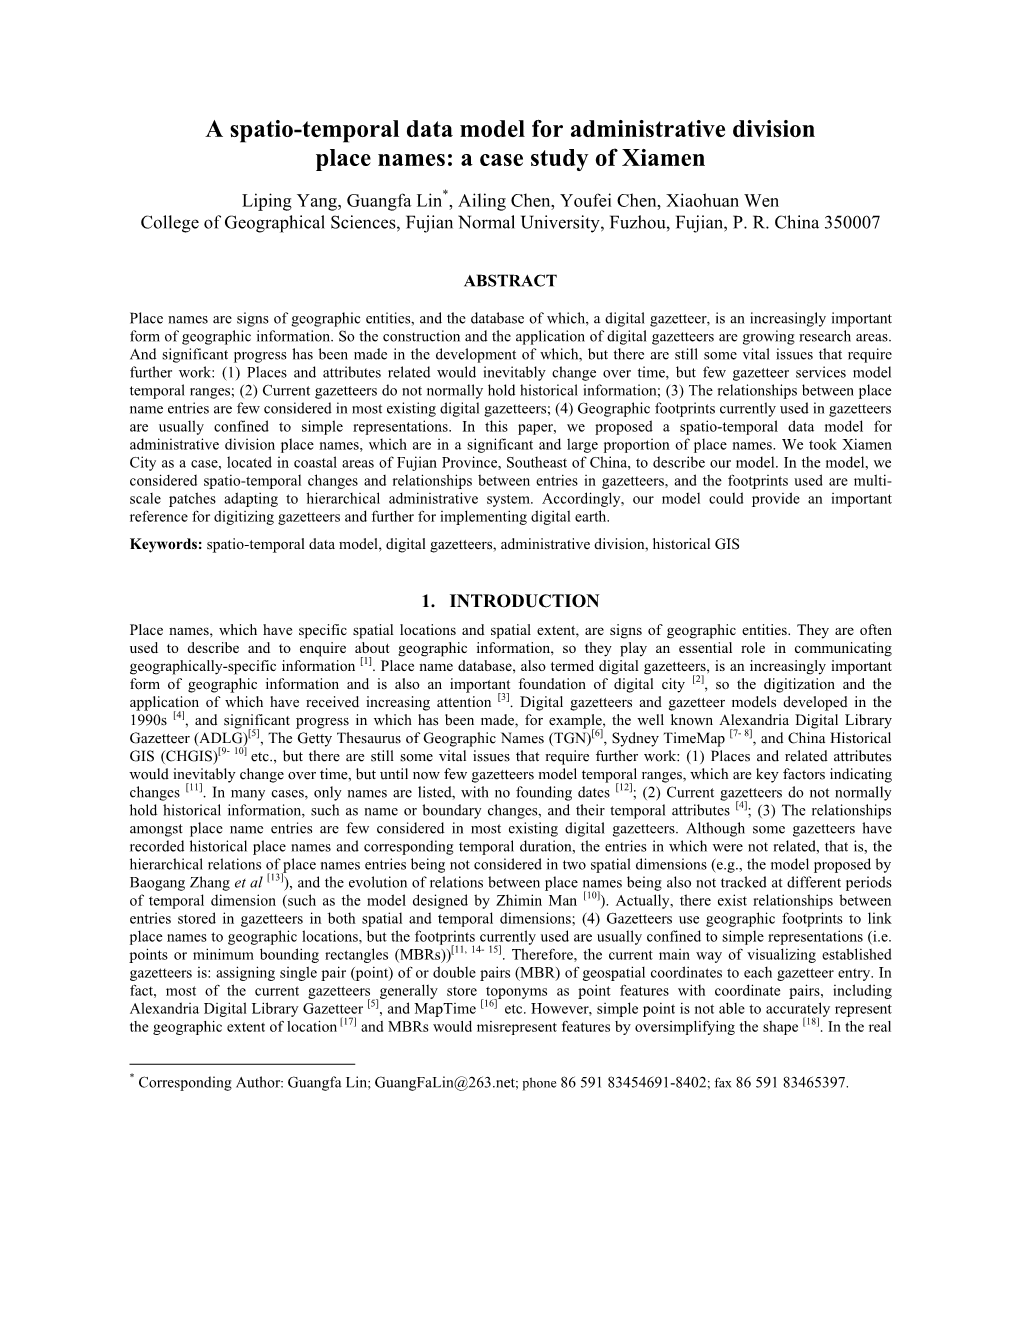 A Spatio-Temporal Data Model for Administrative Division Place Names: a Case Study of Xiamen